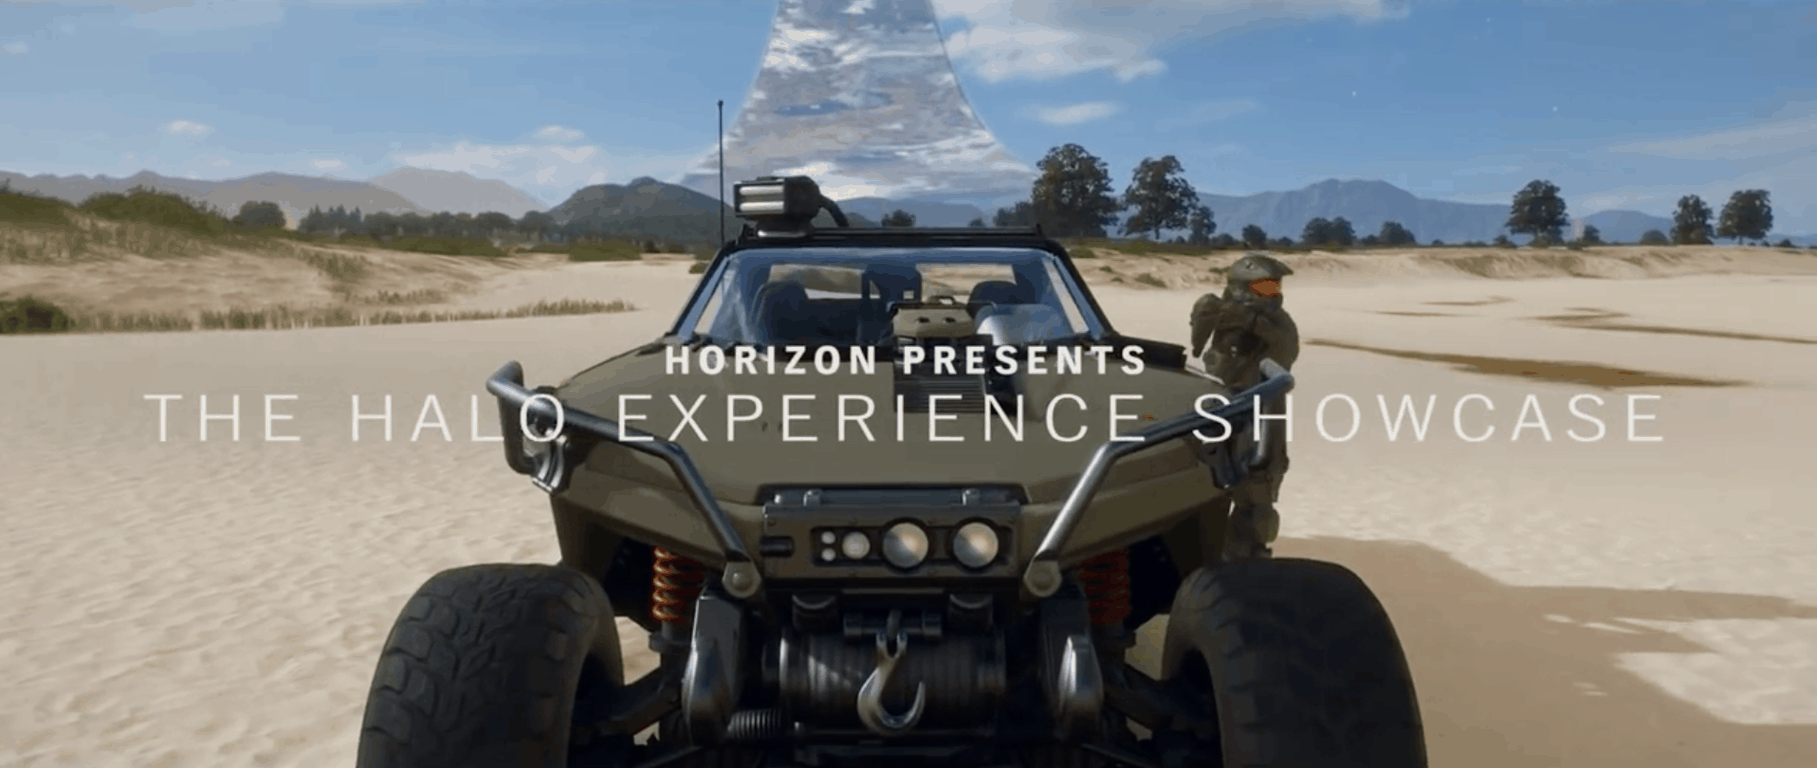 Watch the Halo experience in Forza Horizon 4 in this official video reveal  - OnMSFT.com - September 11, 2018